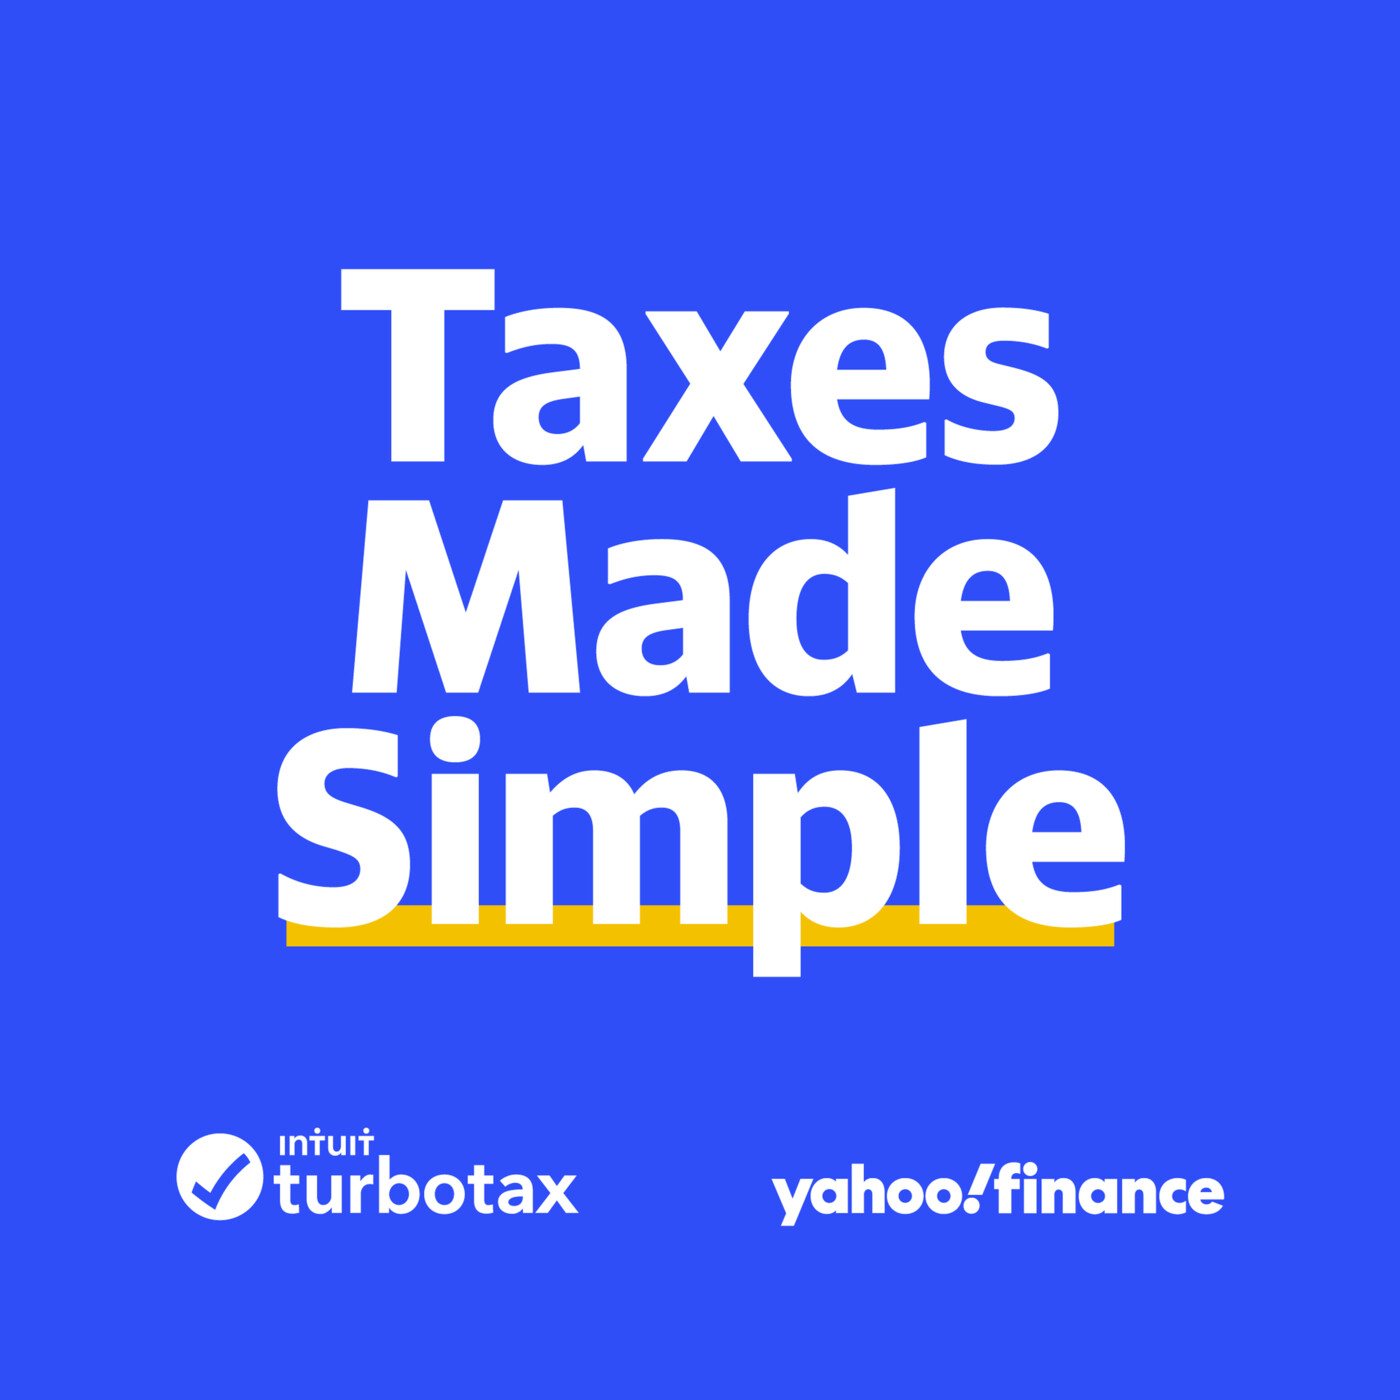 Taxes Made Simple by Yahoo Finance & TurboTax (Trailer)